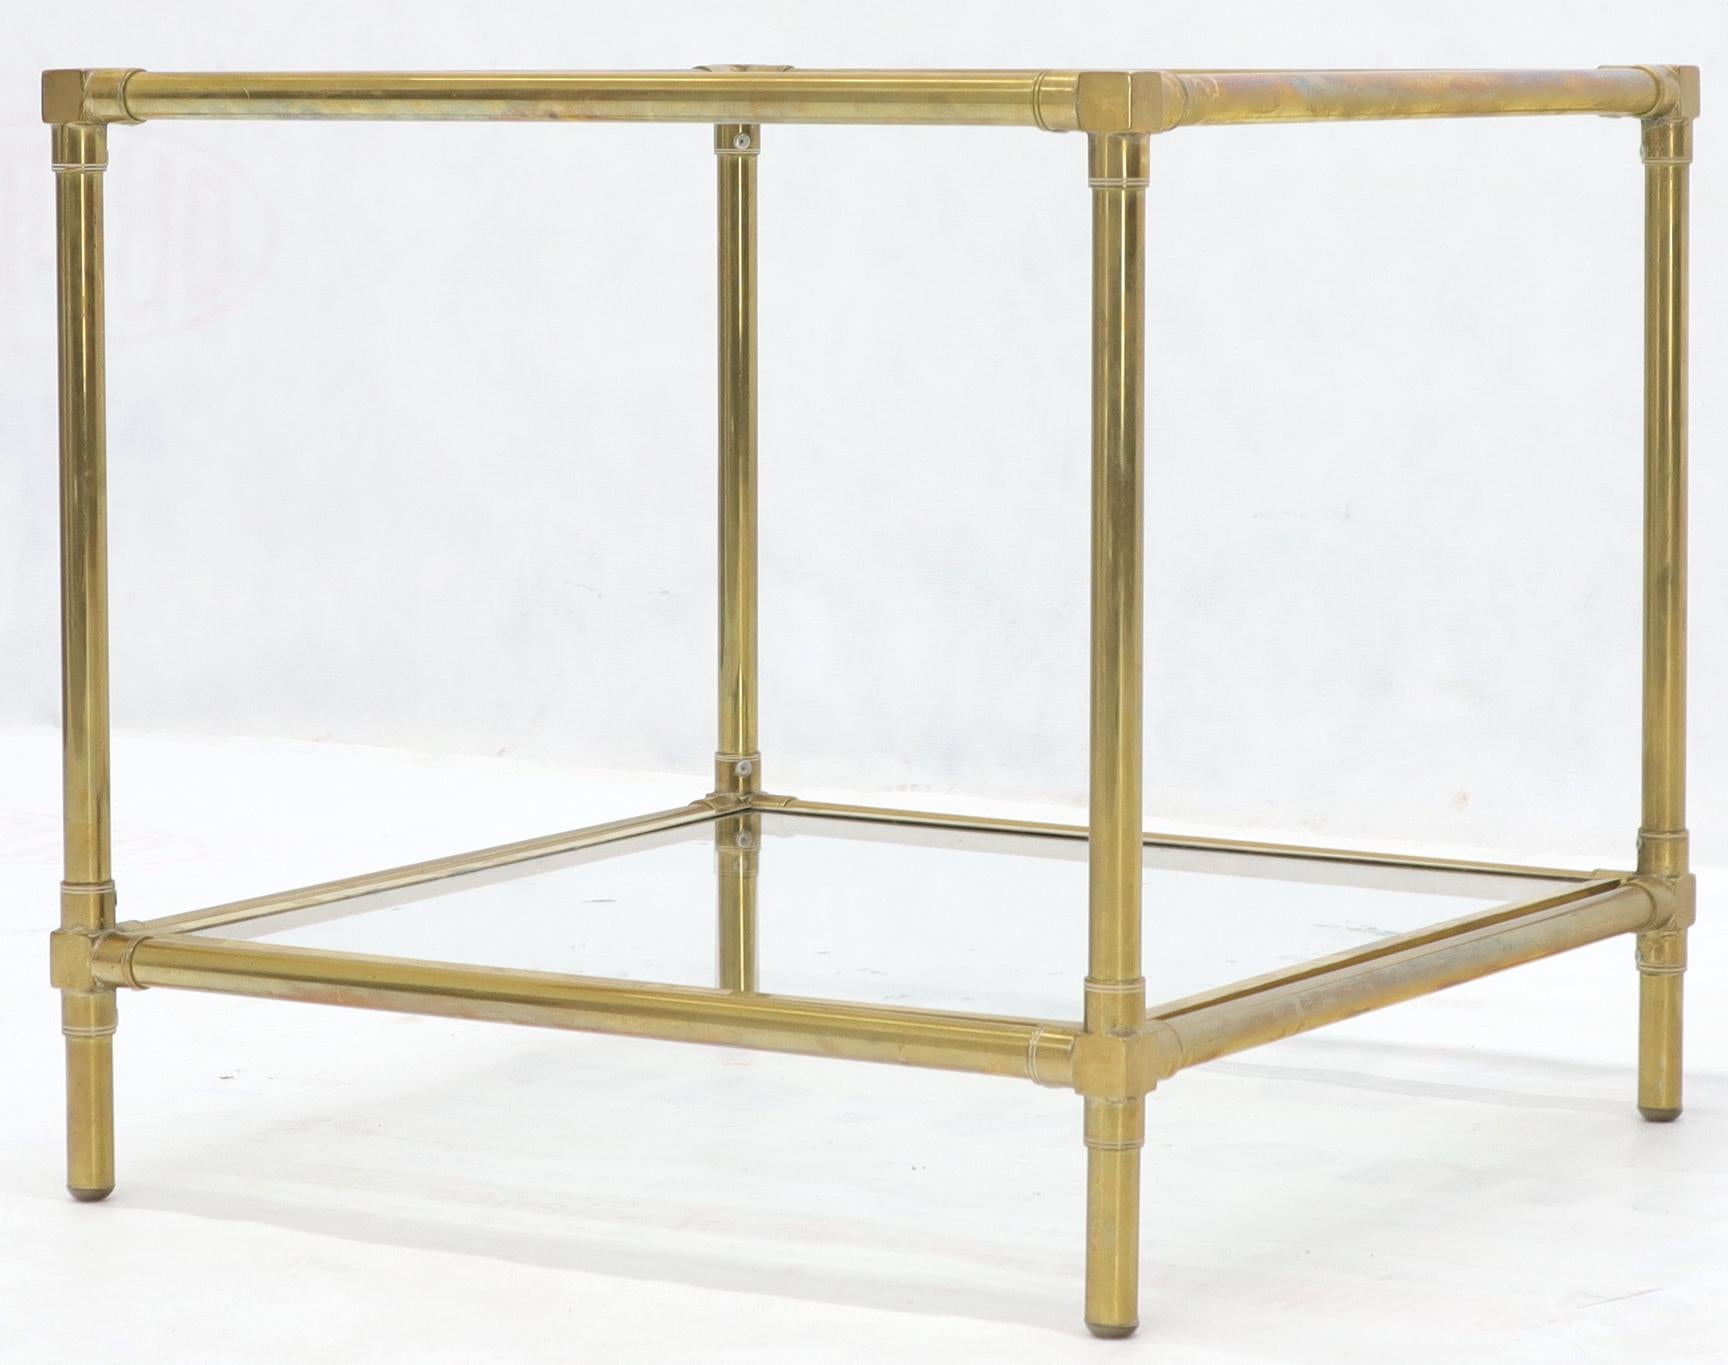 Heavy Machined Brass Glass Top Cube Shape Side Coffee Table In Excellent Condition For Sale In Rockaway, NJ